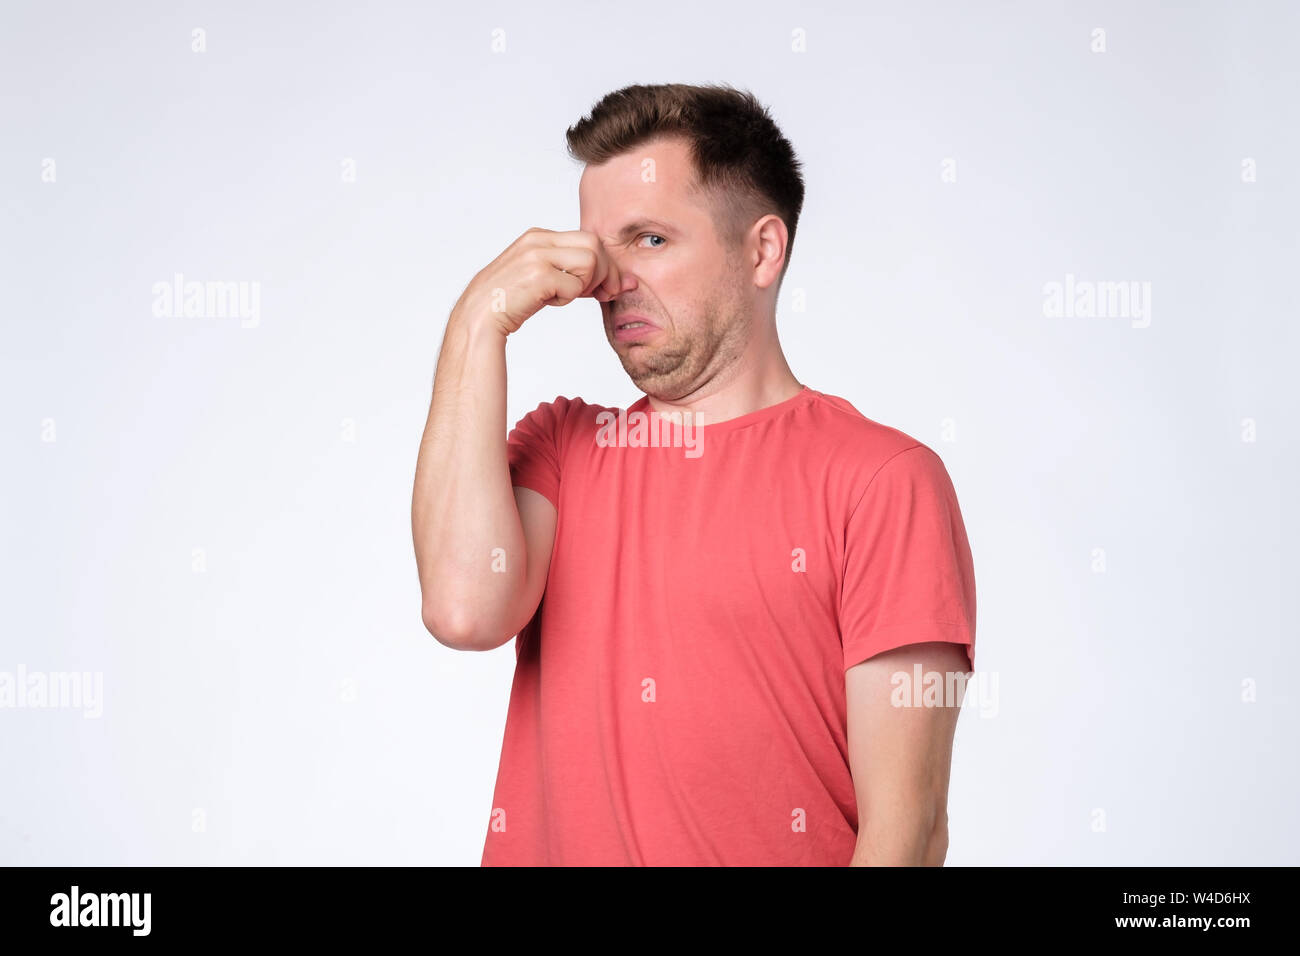 Displeased young man plugs nose as smells something stink and unpleasant. Stock Photo